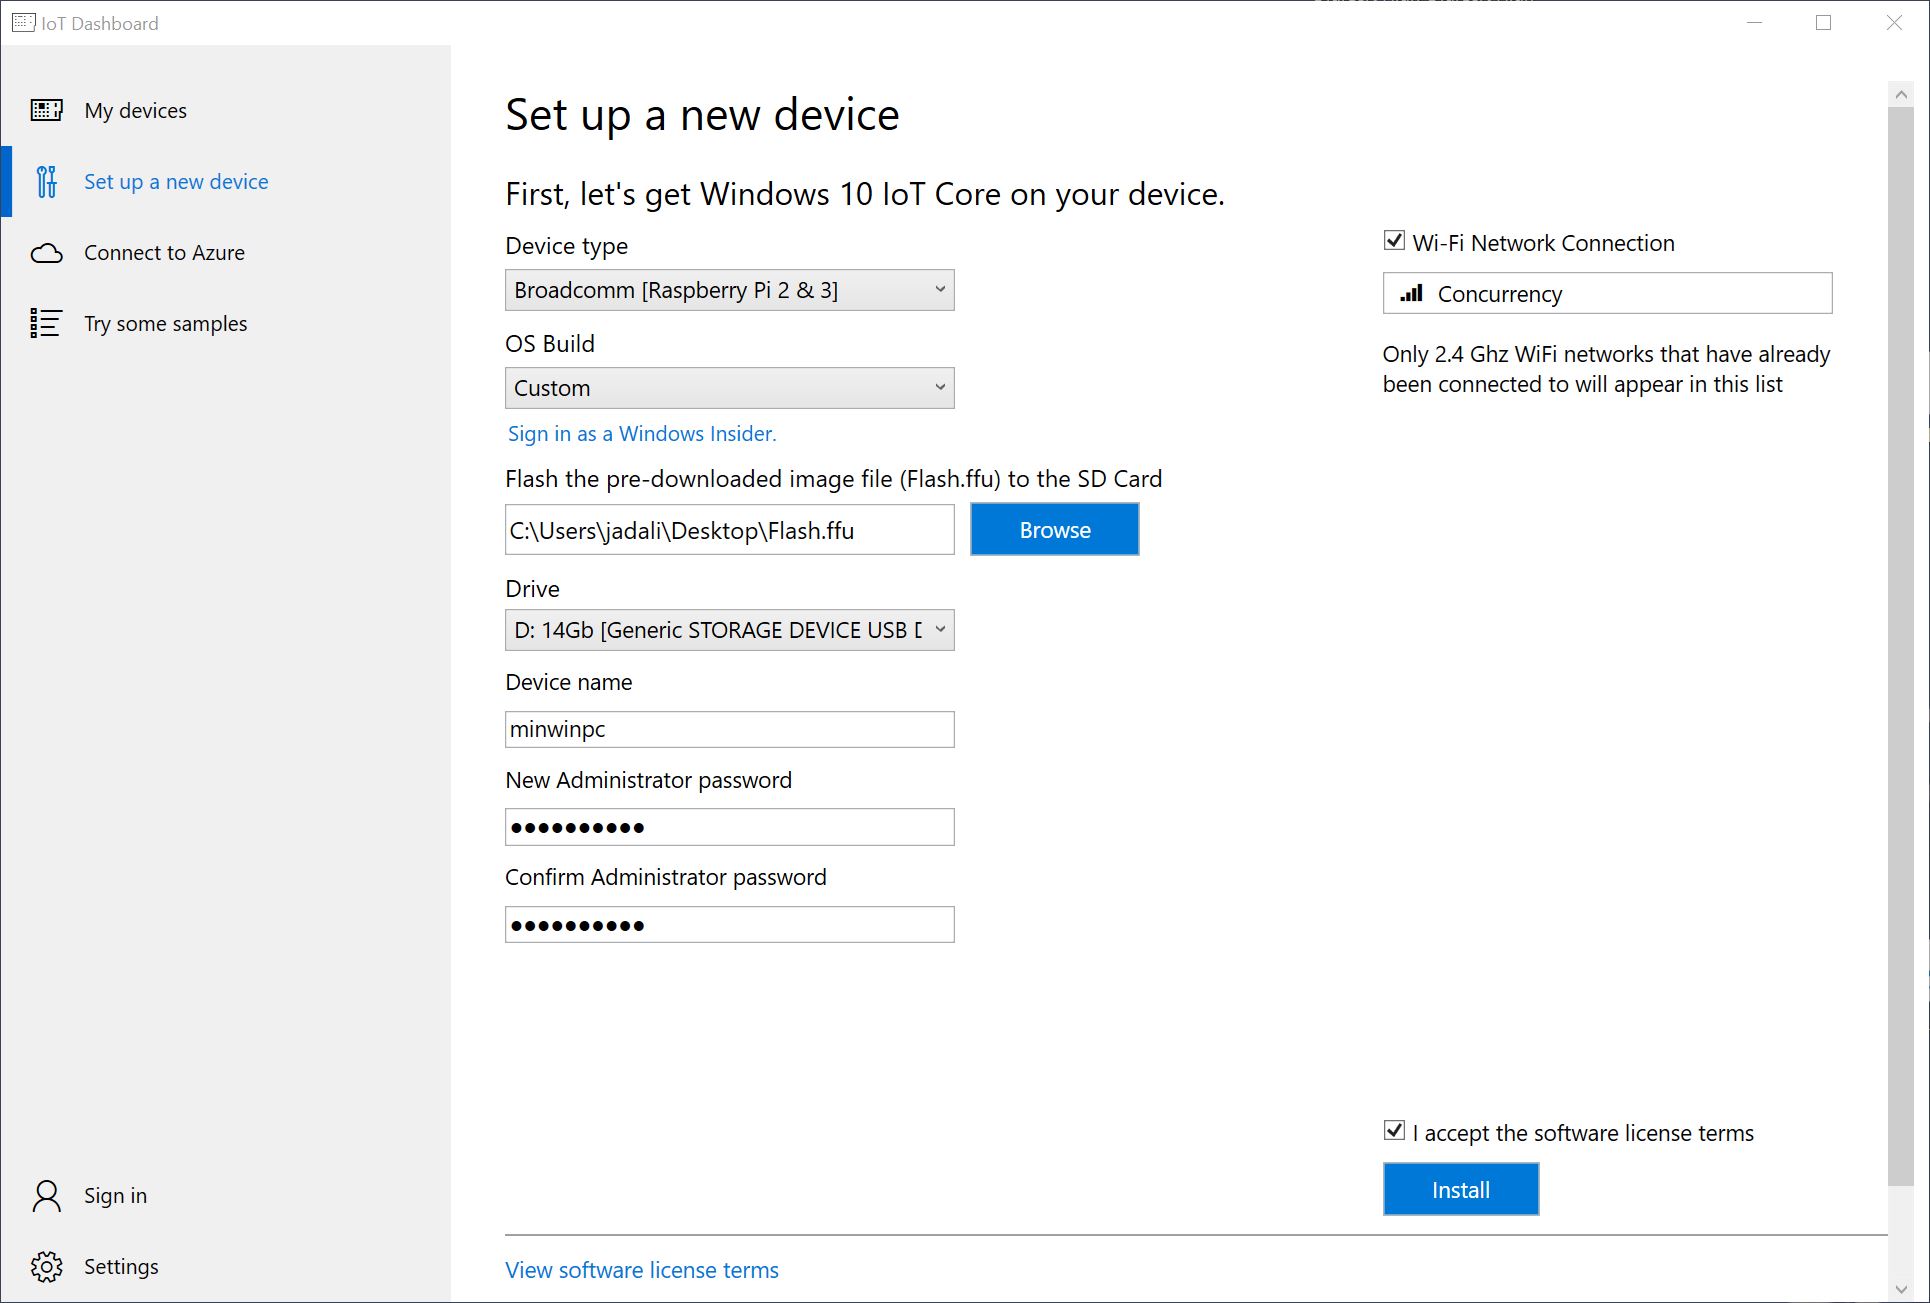 IoT Dashboard dialog box in Windows settings showing new device set up